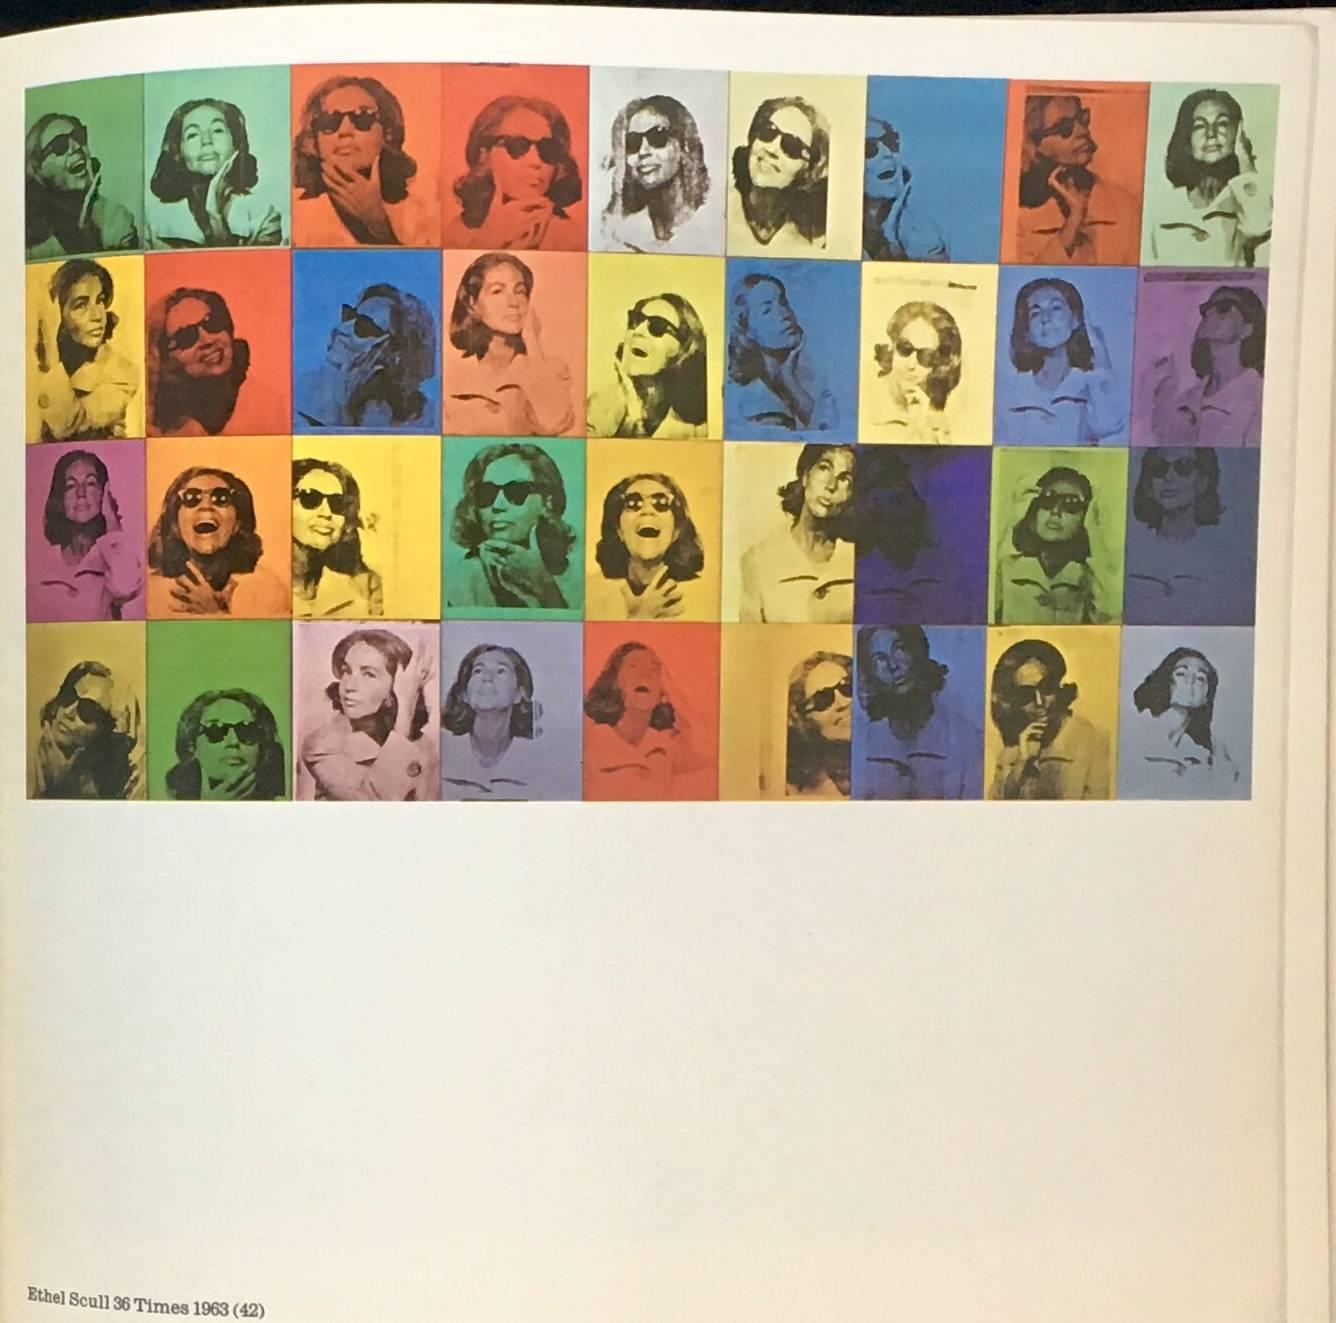 Andy Warhol Tate Gallery Catalog 1971, Marilyn and Liz Cover 2